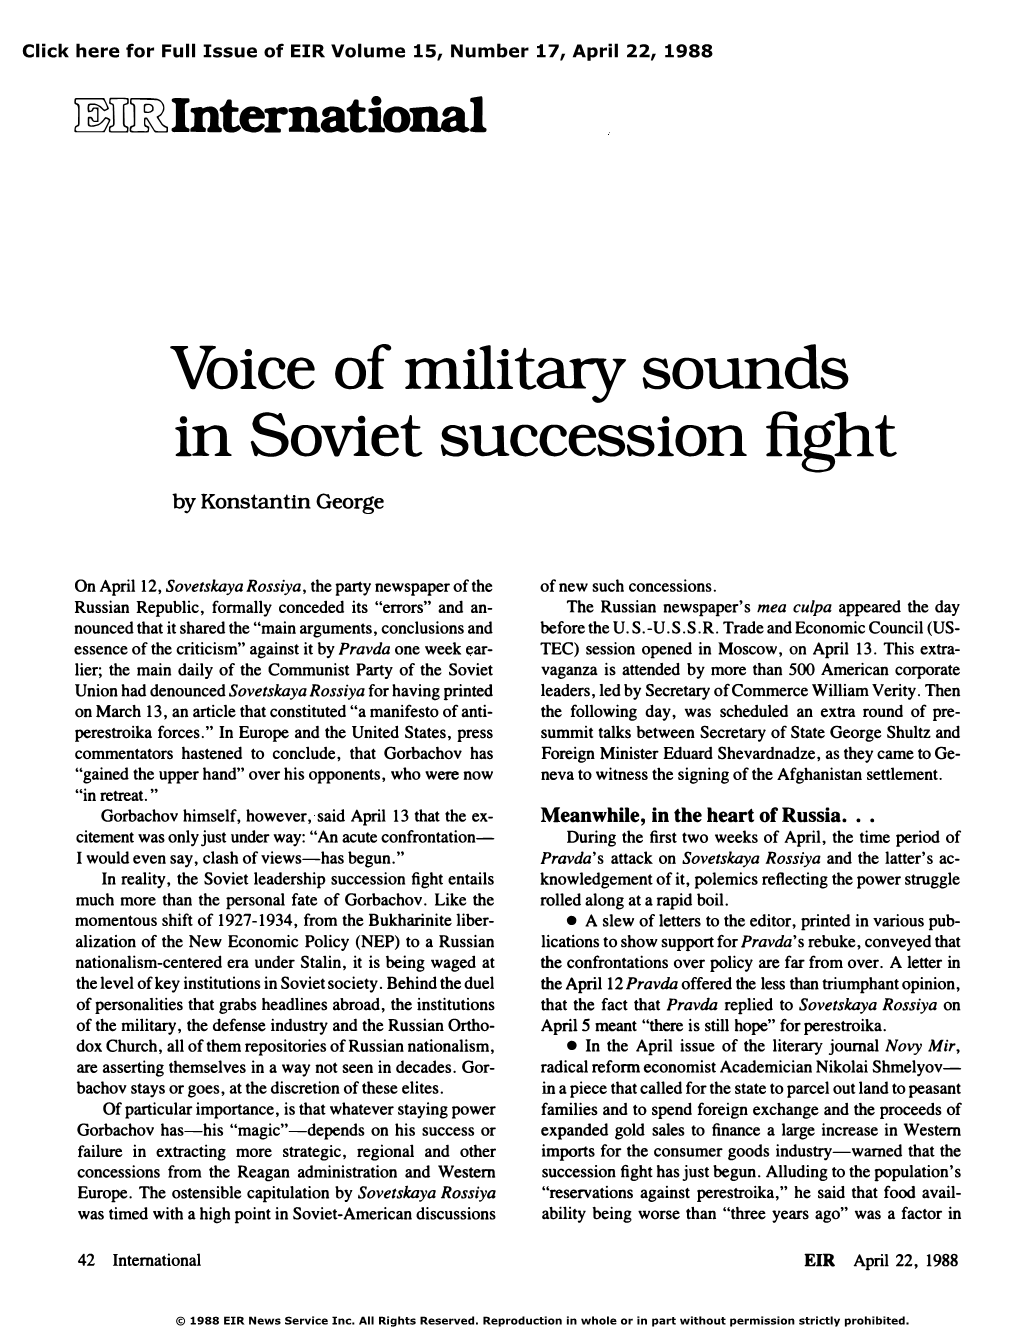 Voice of Military Sounds in Soviet Succession Fight